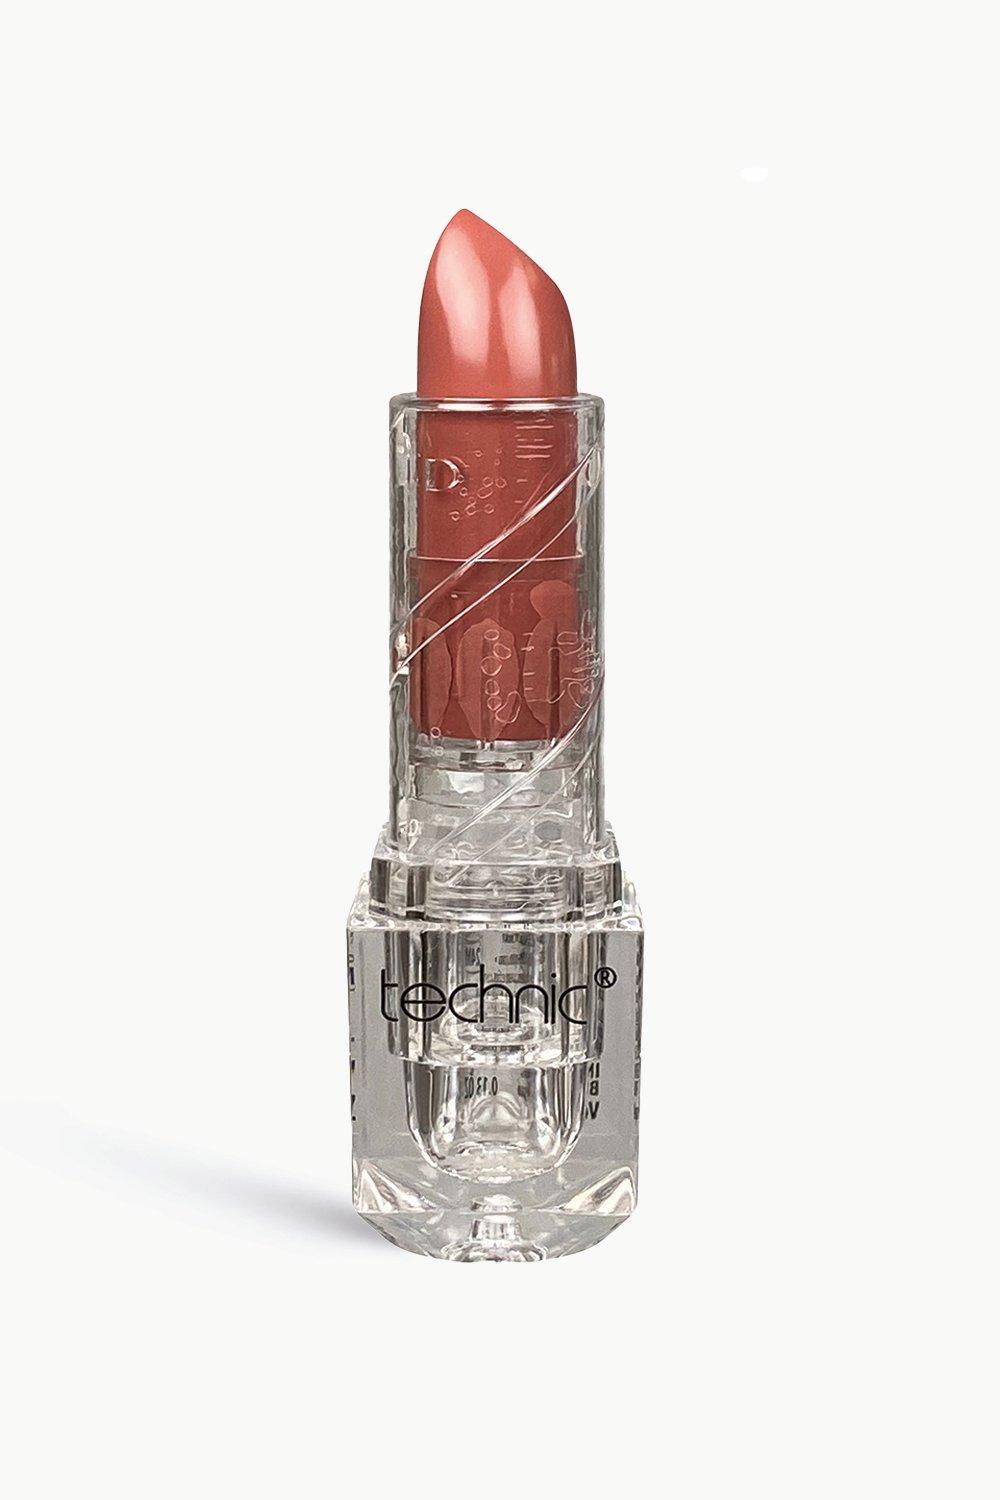 Image of Technic - Rossetto Nude Edition Matte - In The Buff, Pink